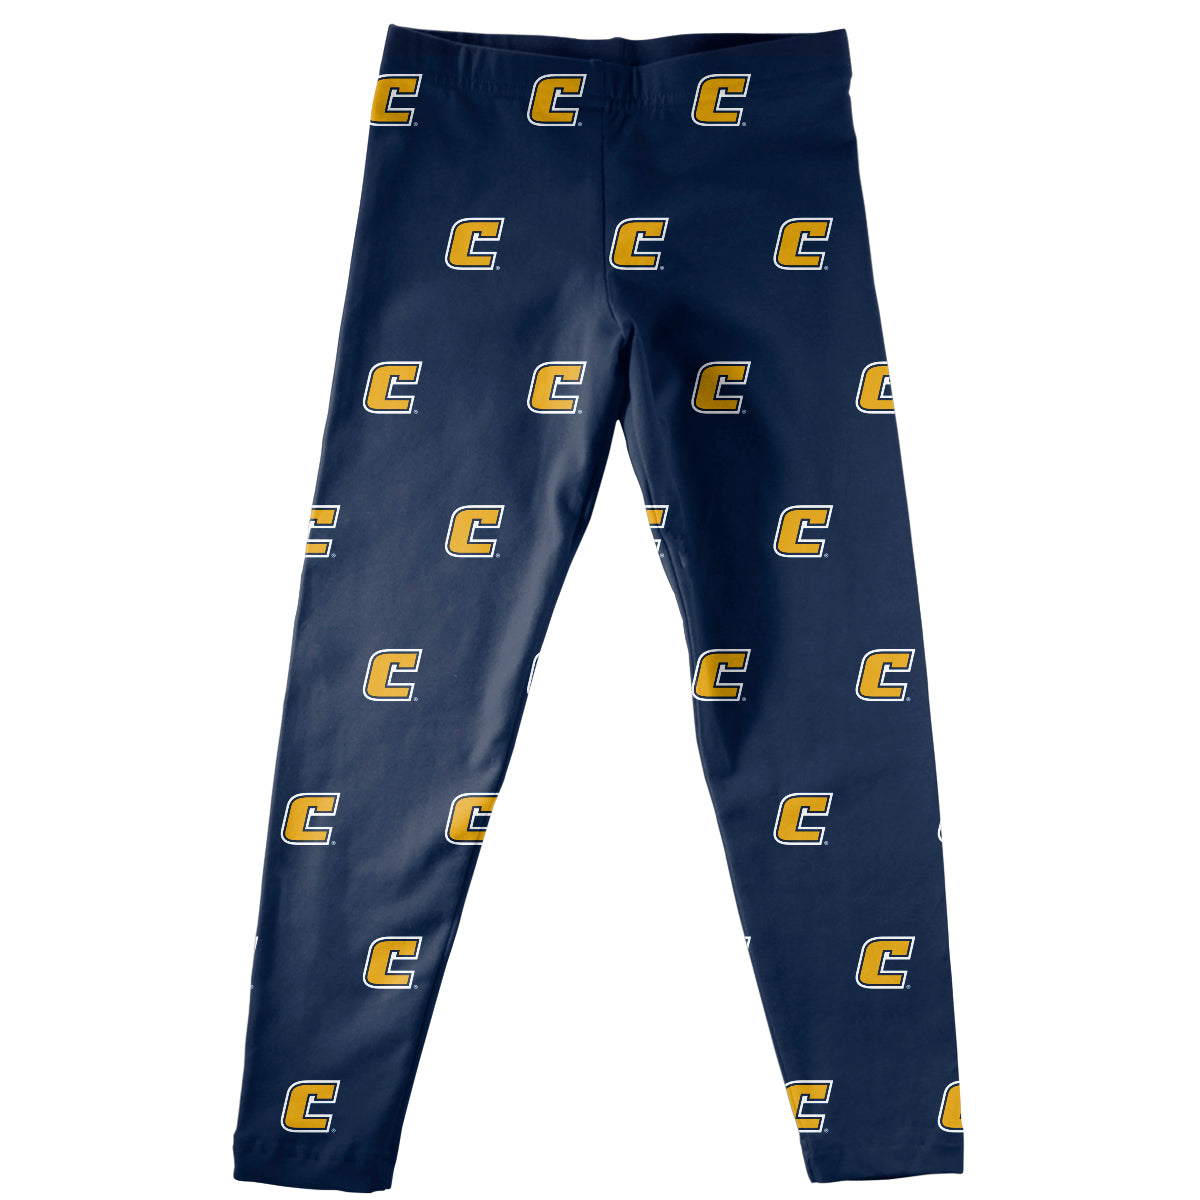 Women's Blue/Gold Tennessee Chattanooga Mocs Ankle Color Block Yoga Leggings